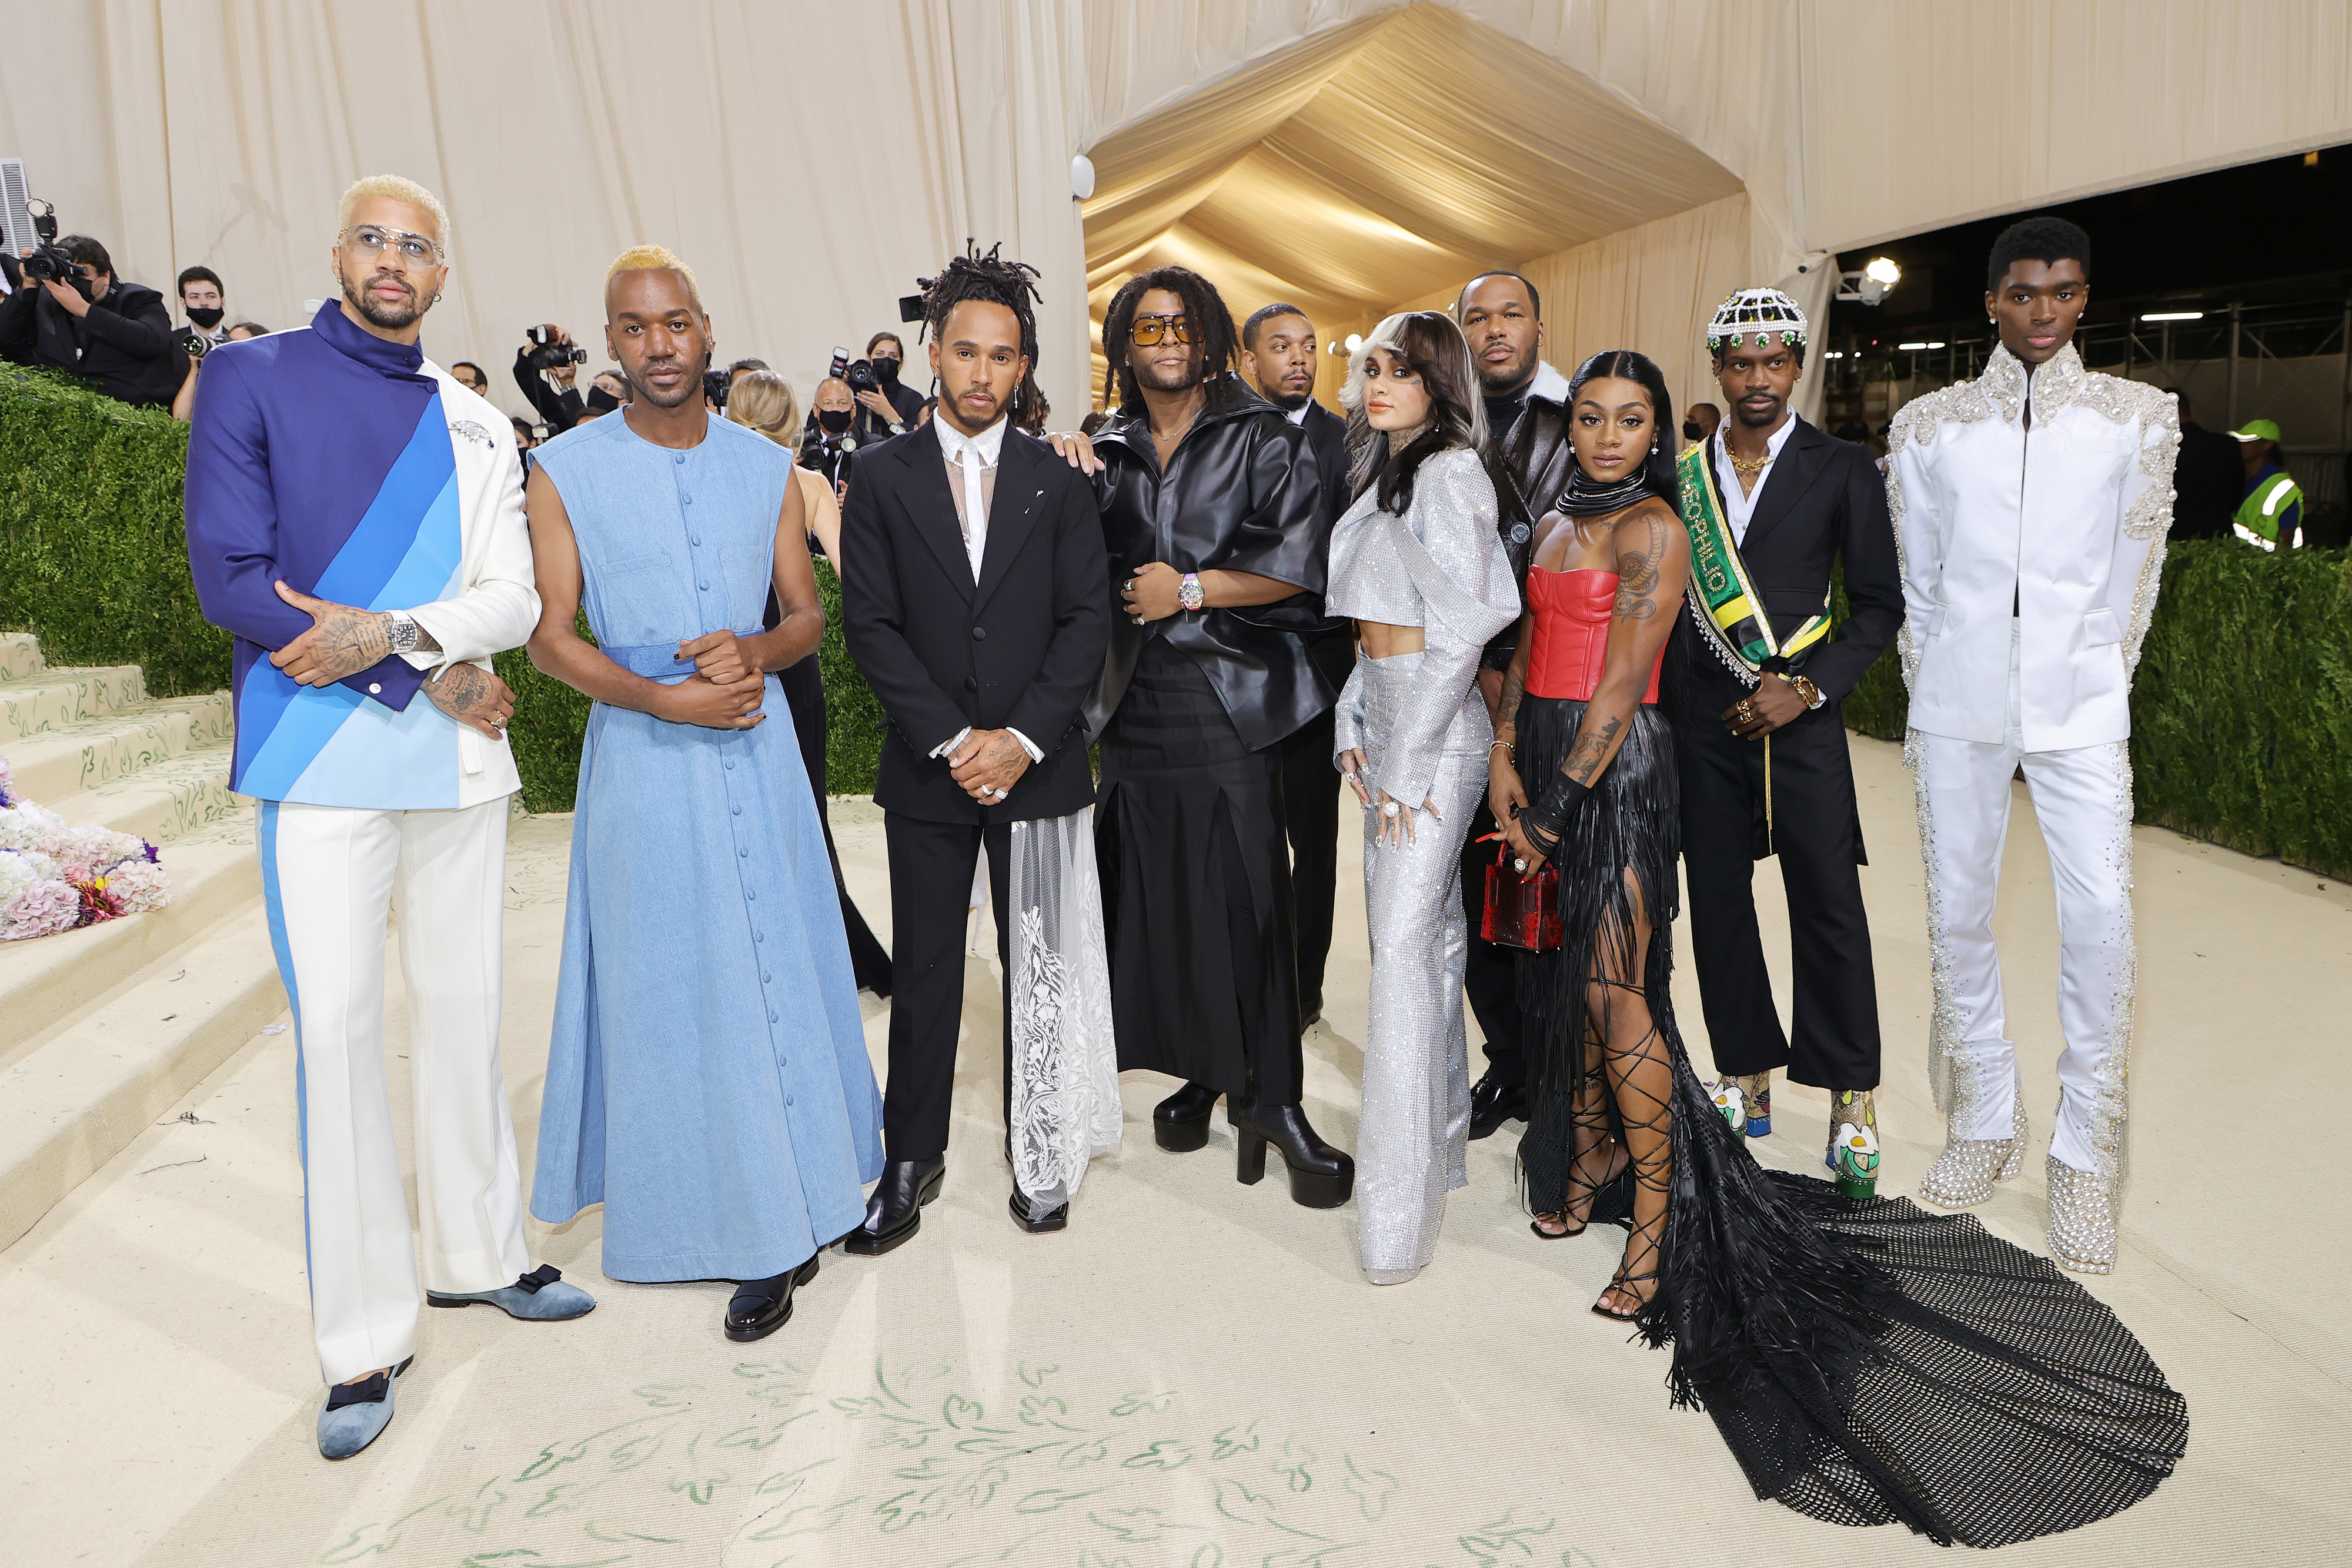 Group of people at an event wearing a variety of high-fashion outfits, some with intricate designs and textures